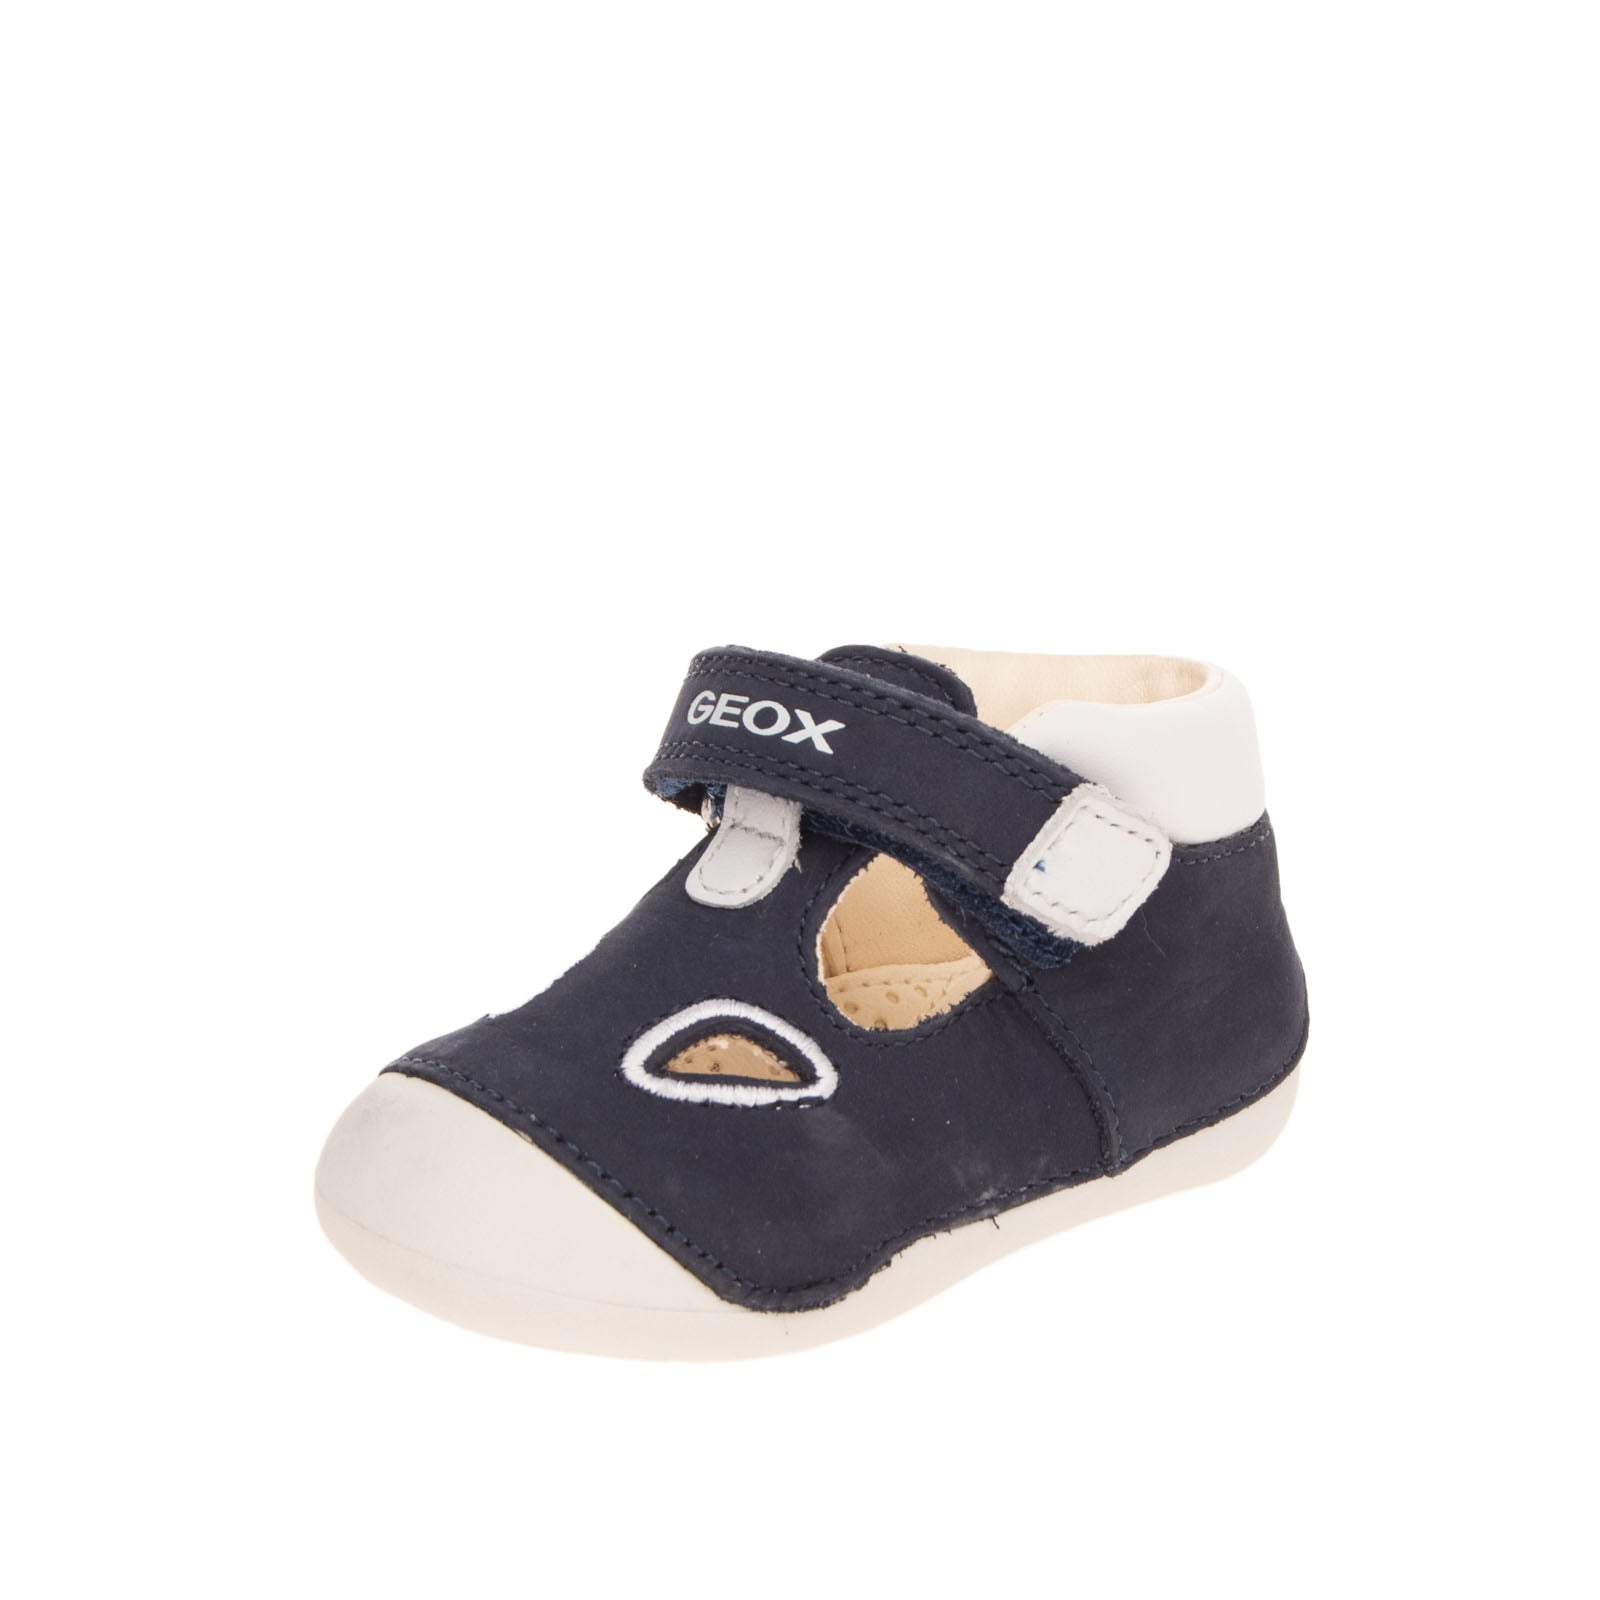 GEOX RESPIRA Baby Leather T-Bar Shoes Size 18 UK 2.5 US 3 Softly Cushioned gallery main photo